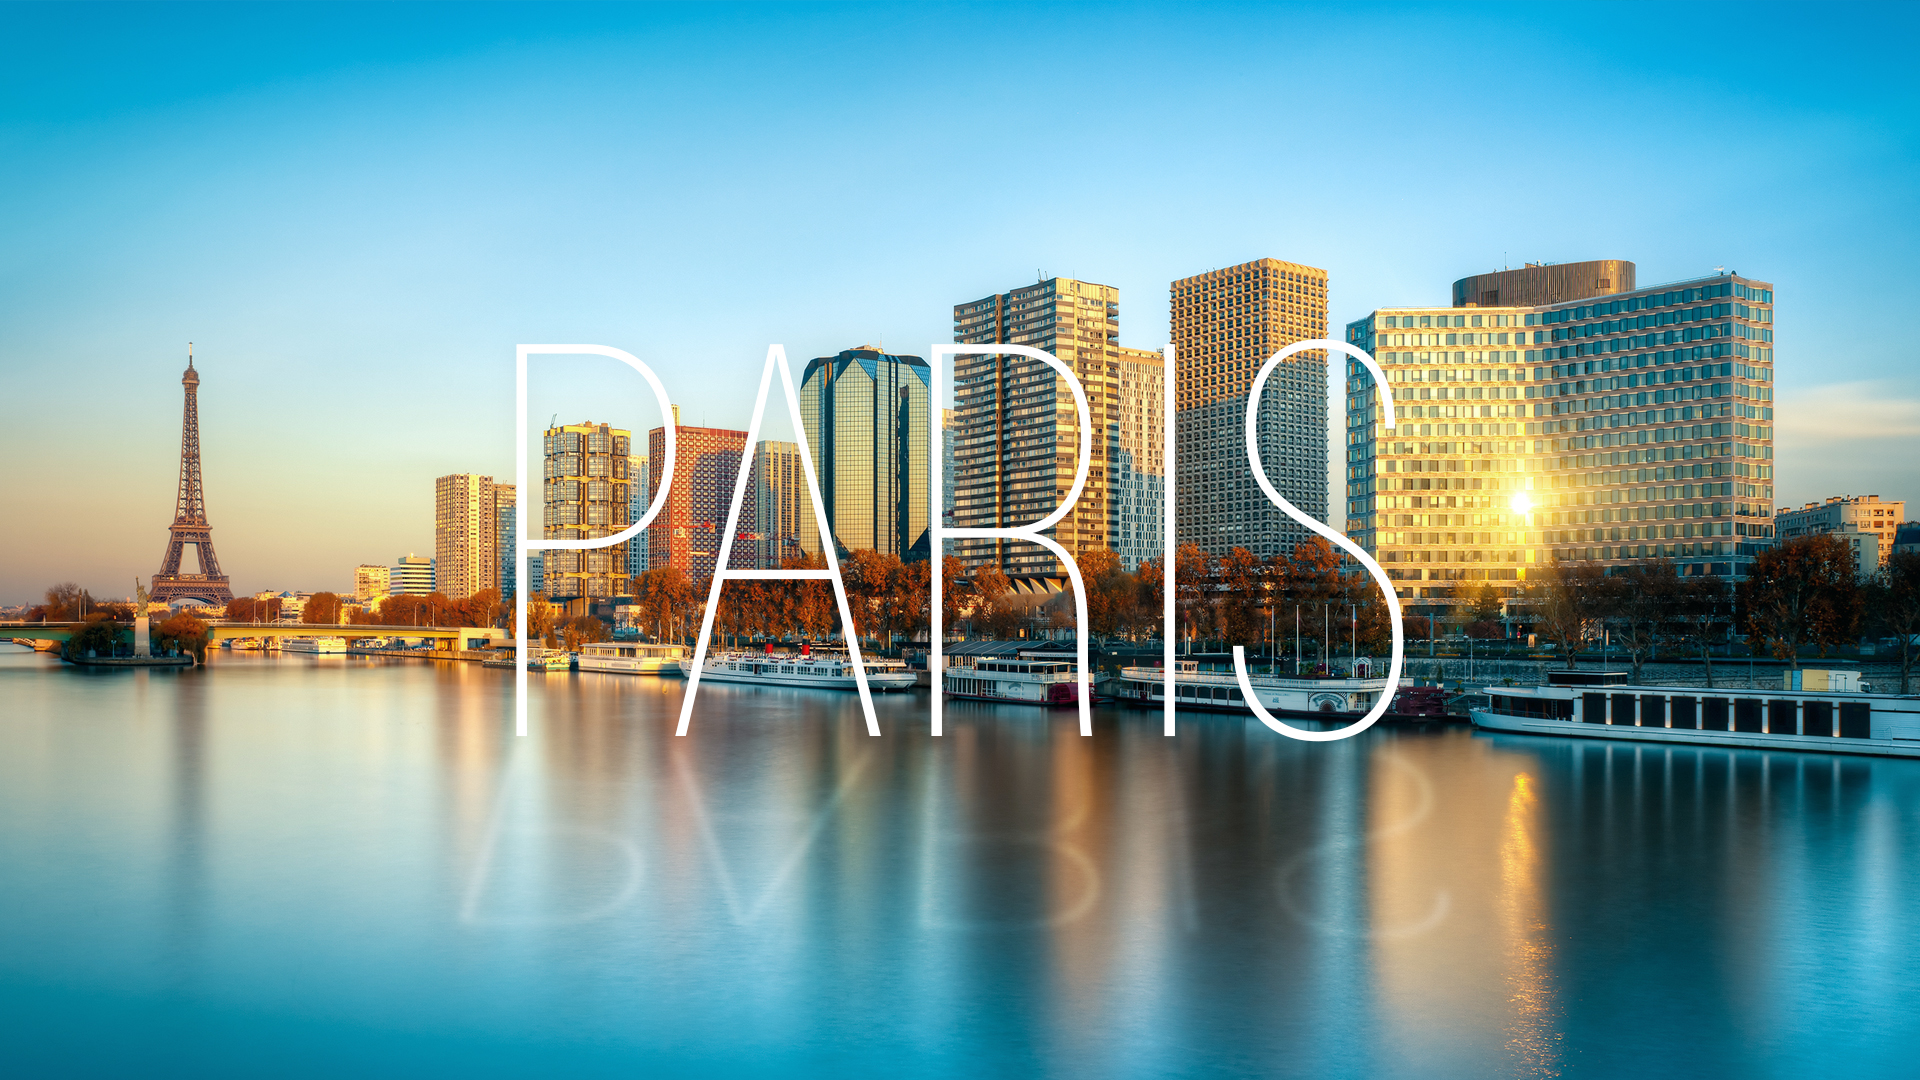 Whether it’s for romance, luxury shopping, some of the best food on the planet, or incredible history - Paris tops the list as the best all-round destination to sink your time, and your money, into!